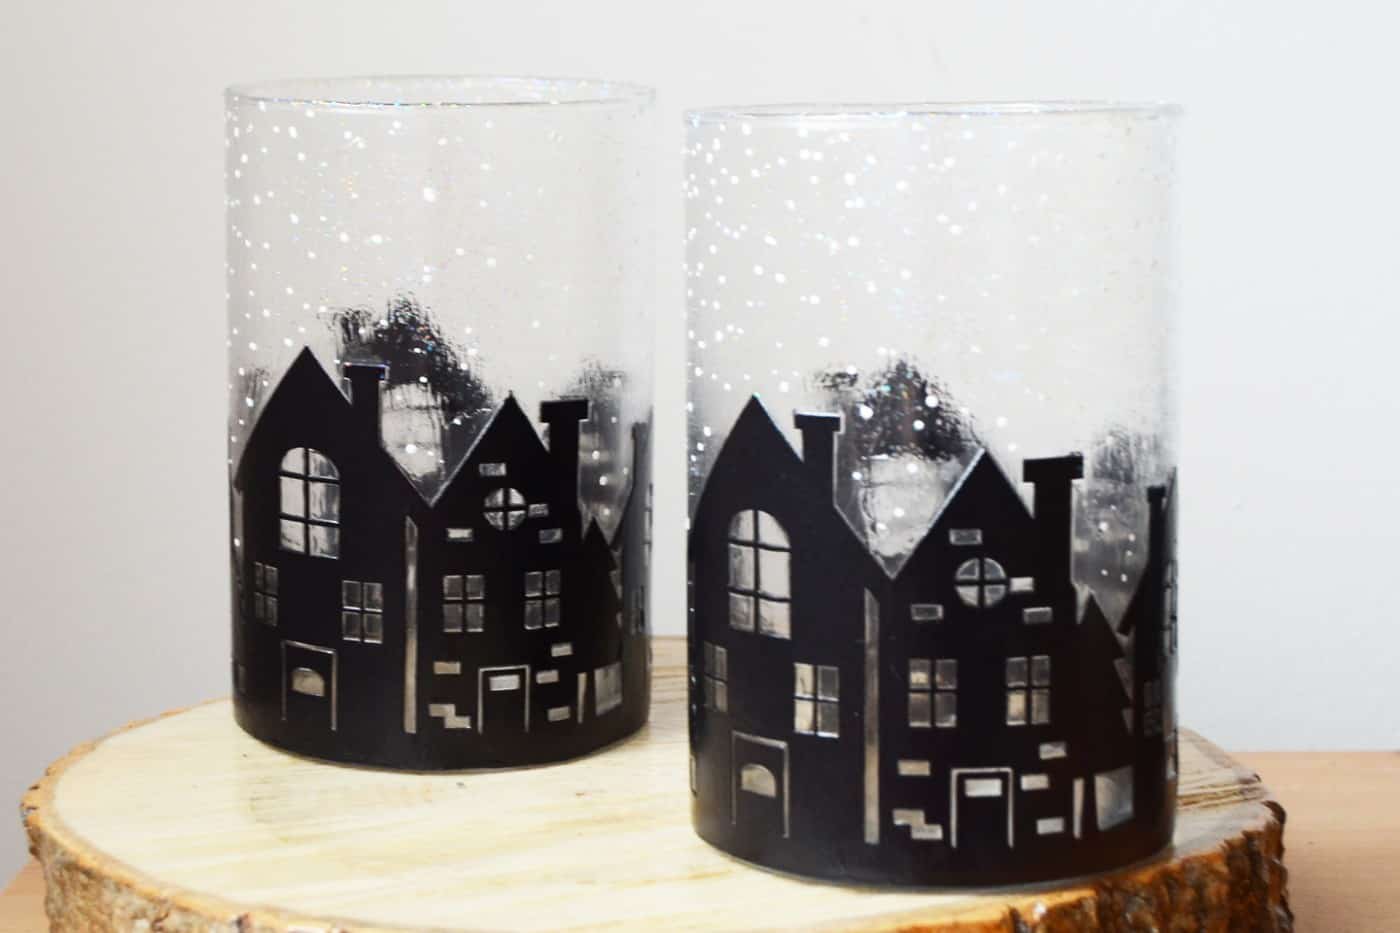 Unique winter vases decorated with village silhouettes and snow